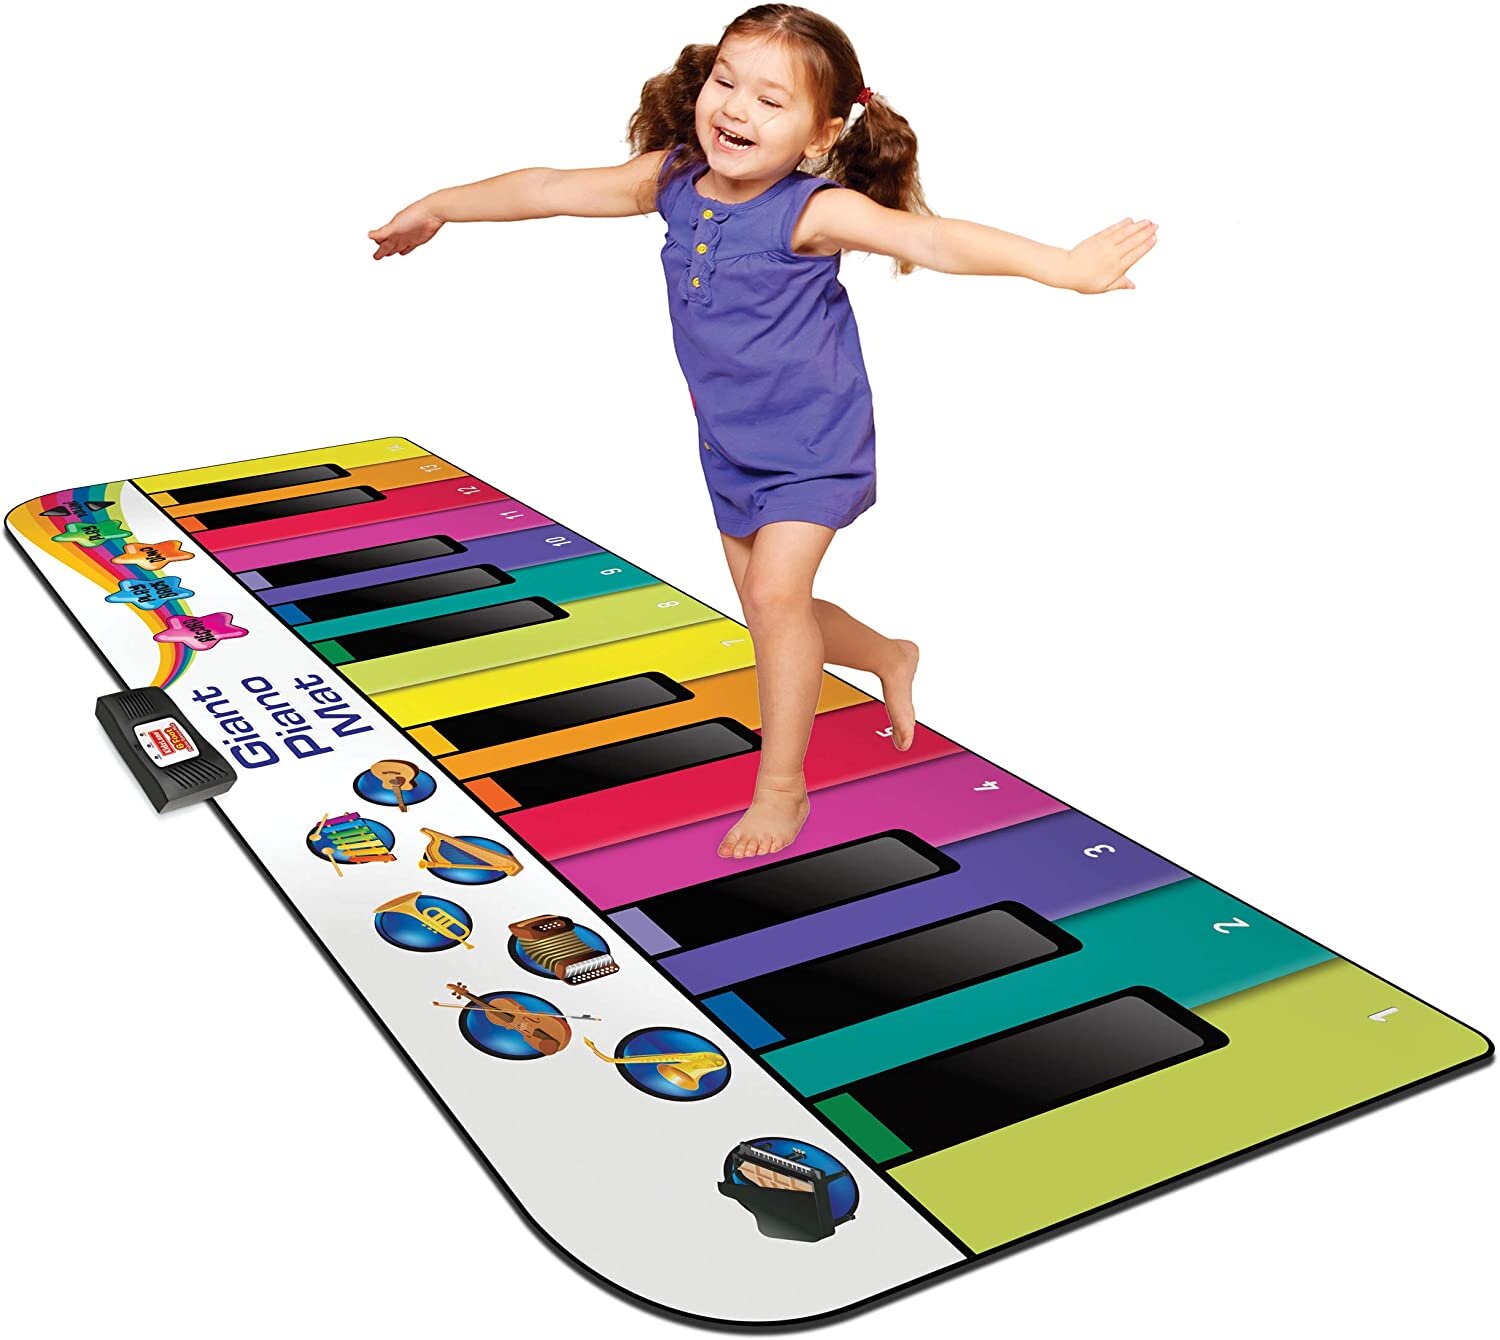 Kids Piano Mat,Toddlers Kids Toys Age 1 2 3 4 5 Year Old Girls Boys Music Dance 